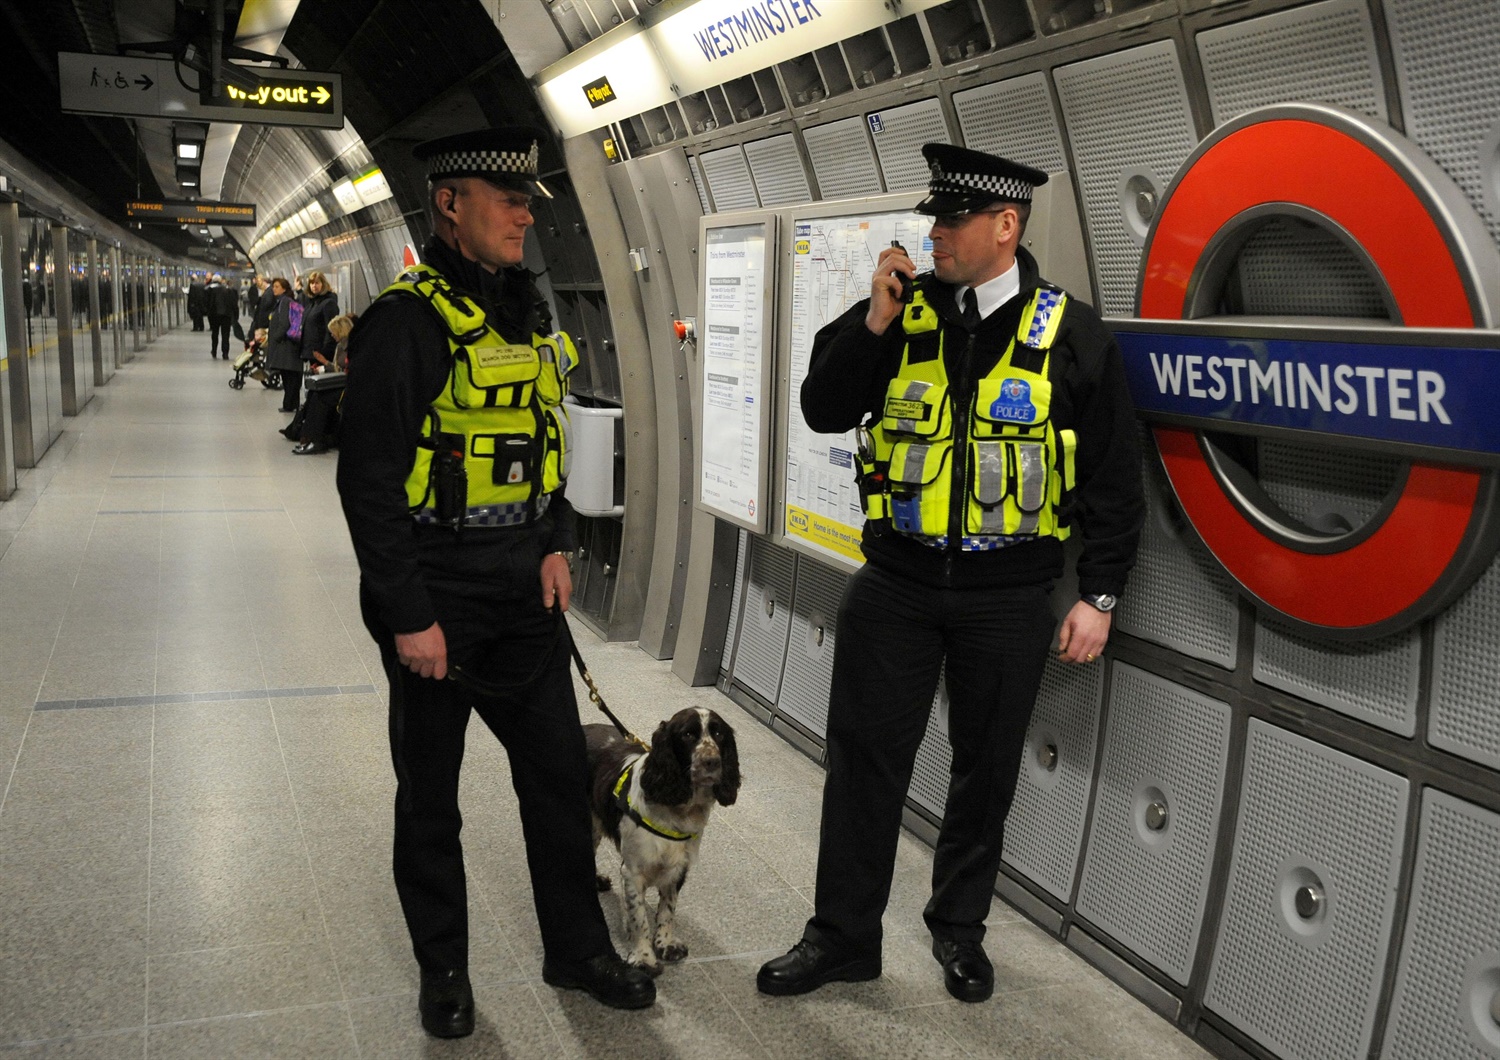 Over 100 police offers to patrol the Night Tube